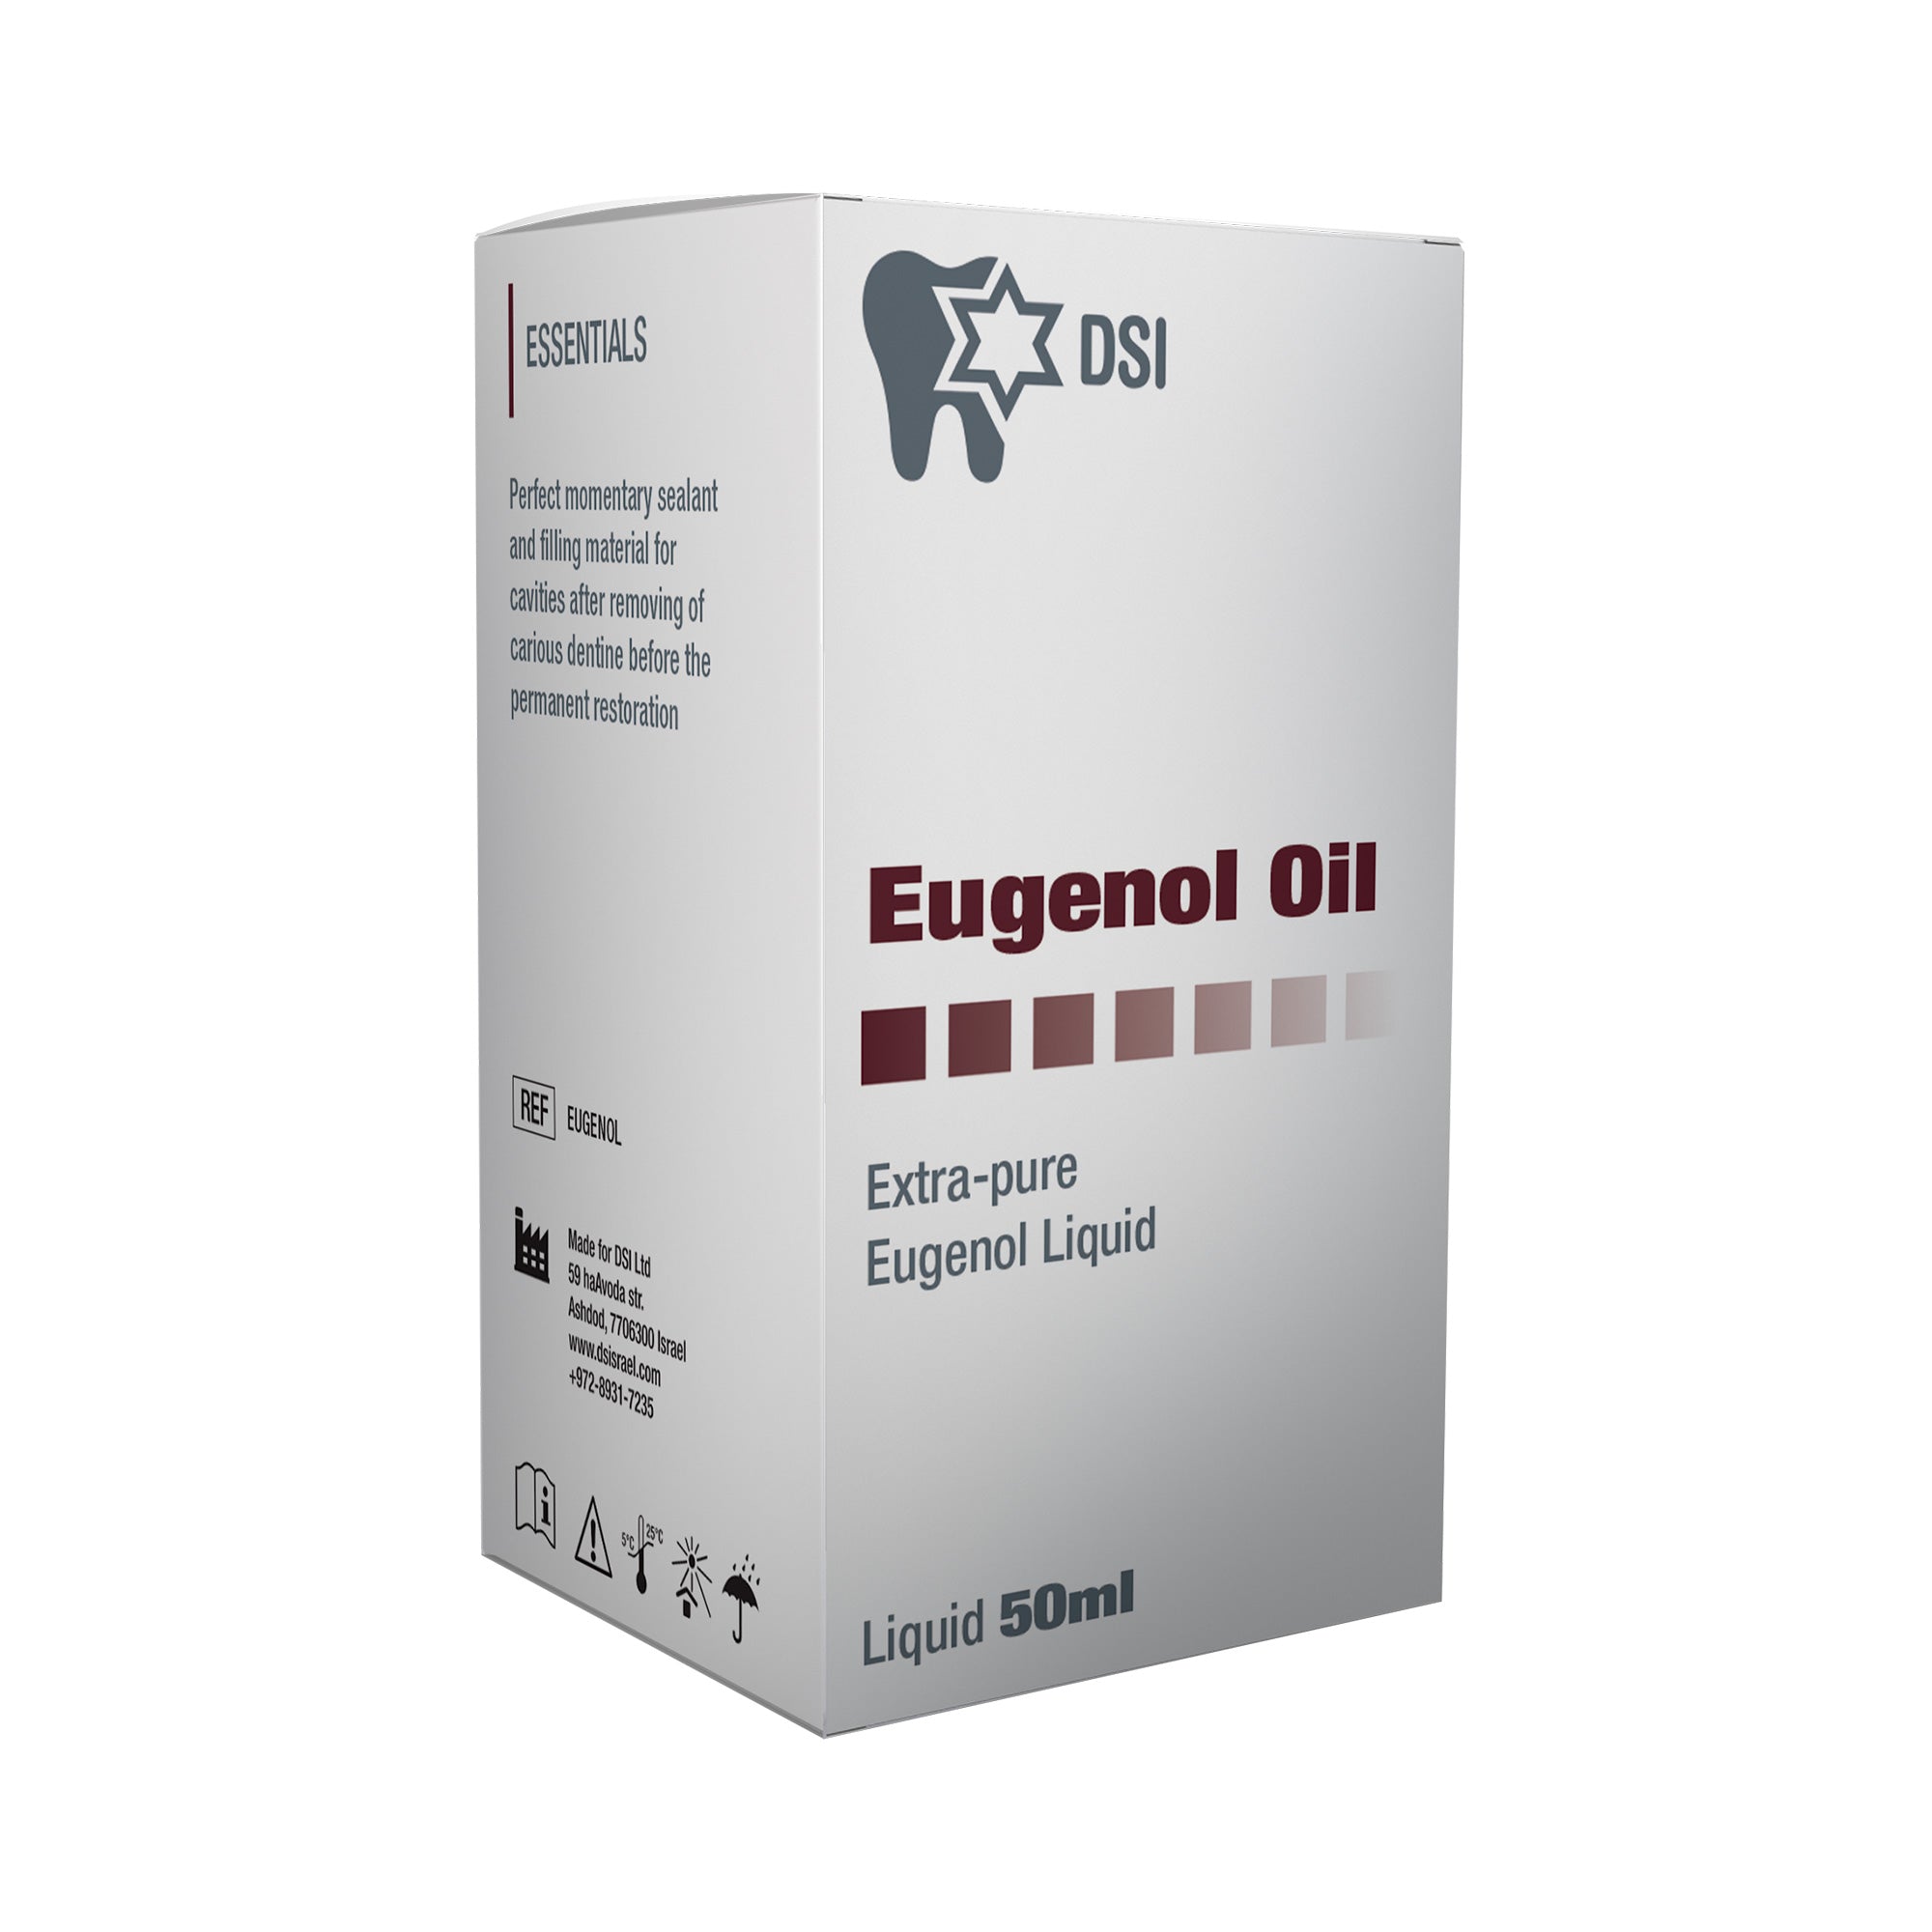 DSI Pure Eugenol Oil For Dental Applications And Pain Relief 50ml 1.7oz